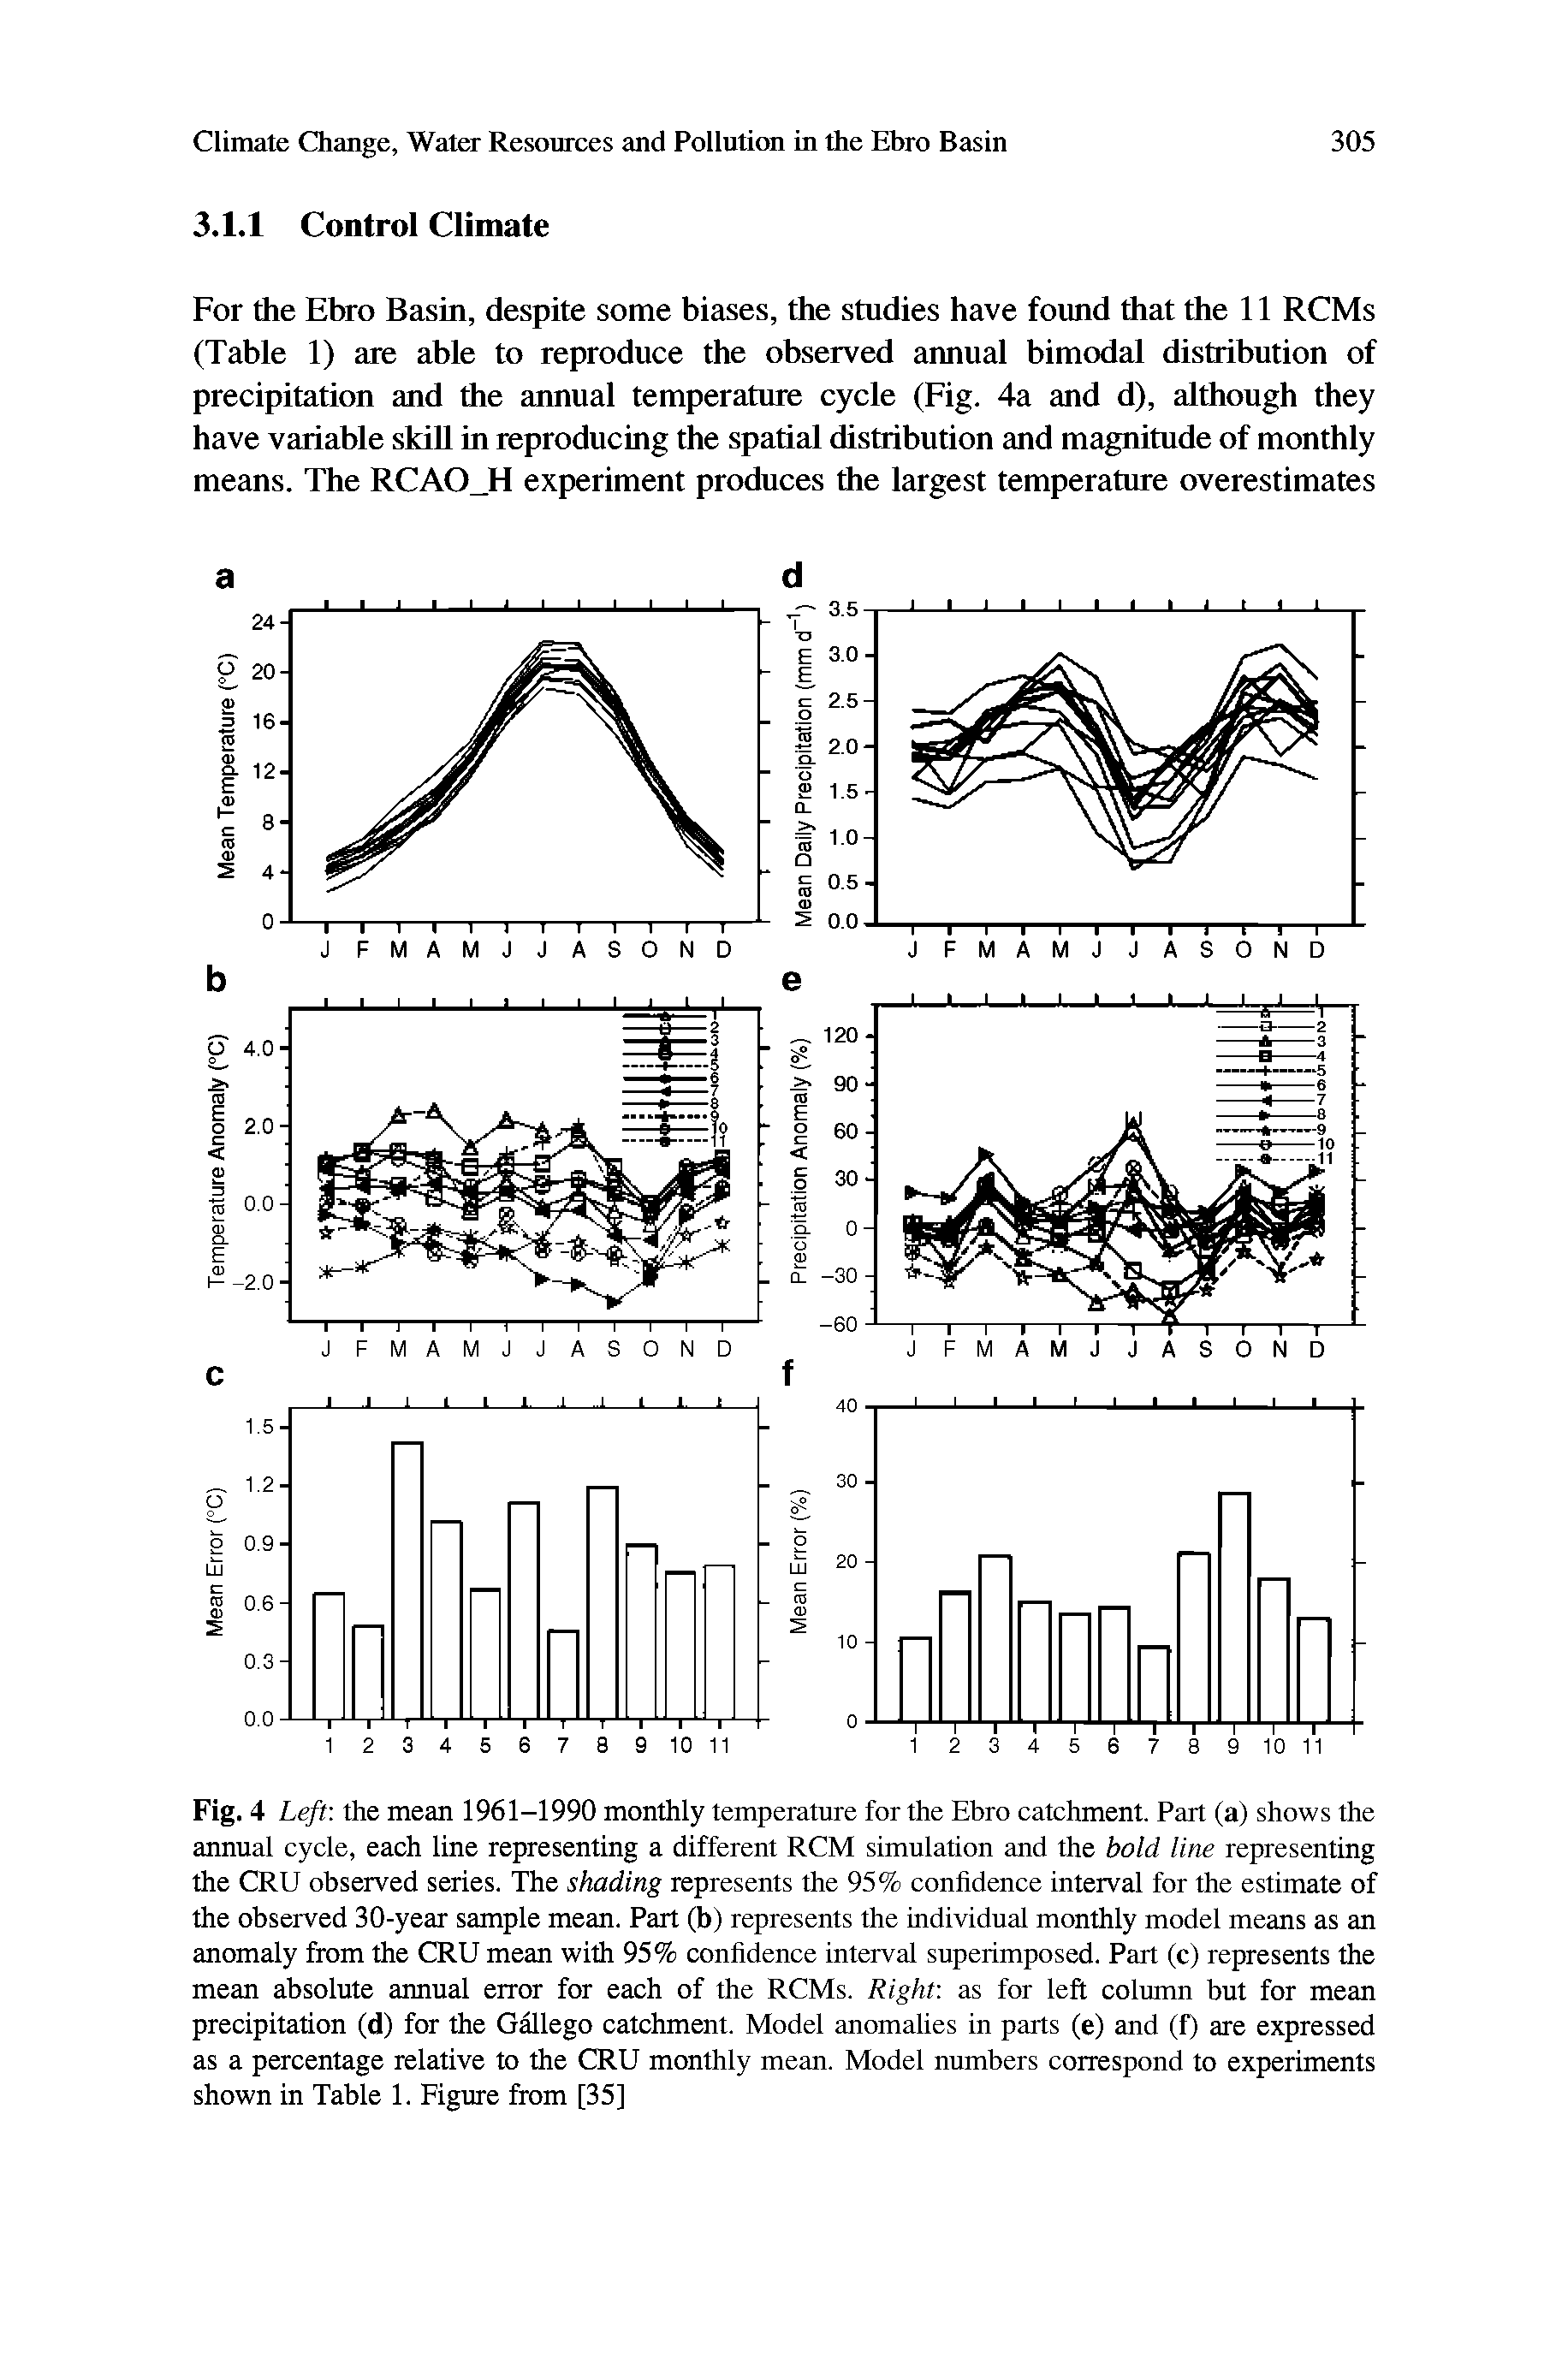 Fig. 4 Left the mean 1961-1990 monthly temperature for the Ebro catchment. Part (a) shows the annual cycle, each line representing a different RCM simulation and the bold line representing the CRU observed series. The shading represents the 95% confidence interval for the estimate of the observed 30-year sample mean. Part (b) represents the individual monthly model means as an anomaly from the CRU mean with 95% confidence interval superimposed. Part (c) represents the mean absolute annual error for each of the RCMs. Right-, as for left column but for mean precipitation (d) for the Gallego catchment. Model anomalies in parts (e) and (f) are expressed as a percentage relative to the CRU monthly mean. Model numbers correspond to experiments shown in Table 1. Figure from [35]...